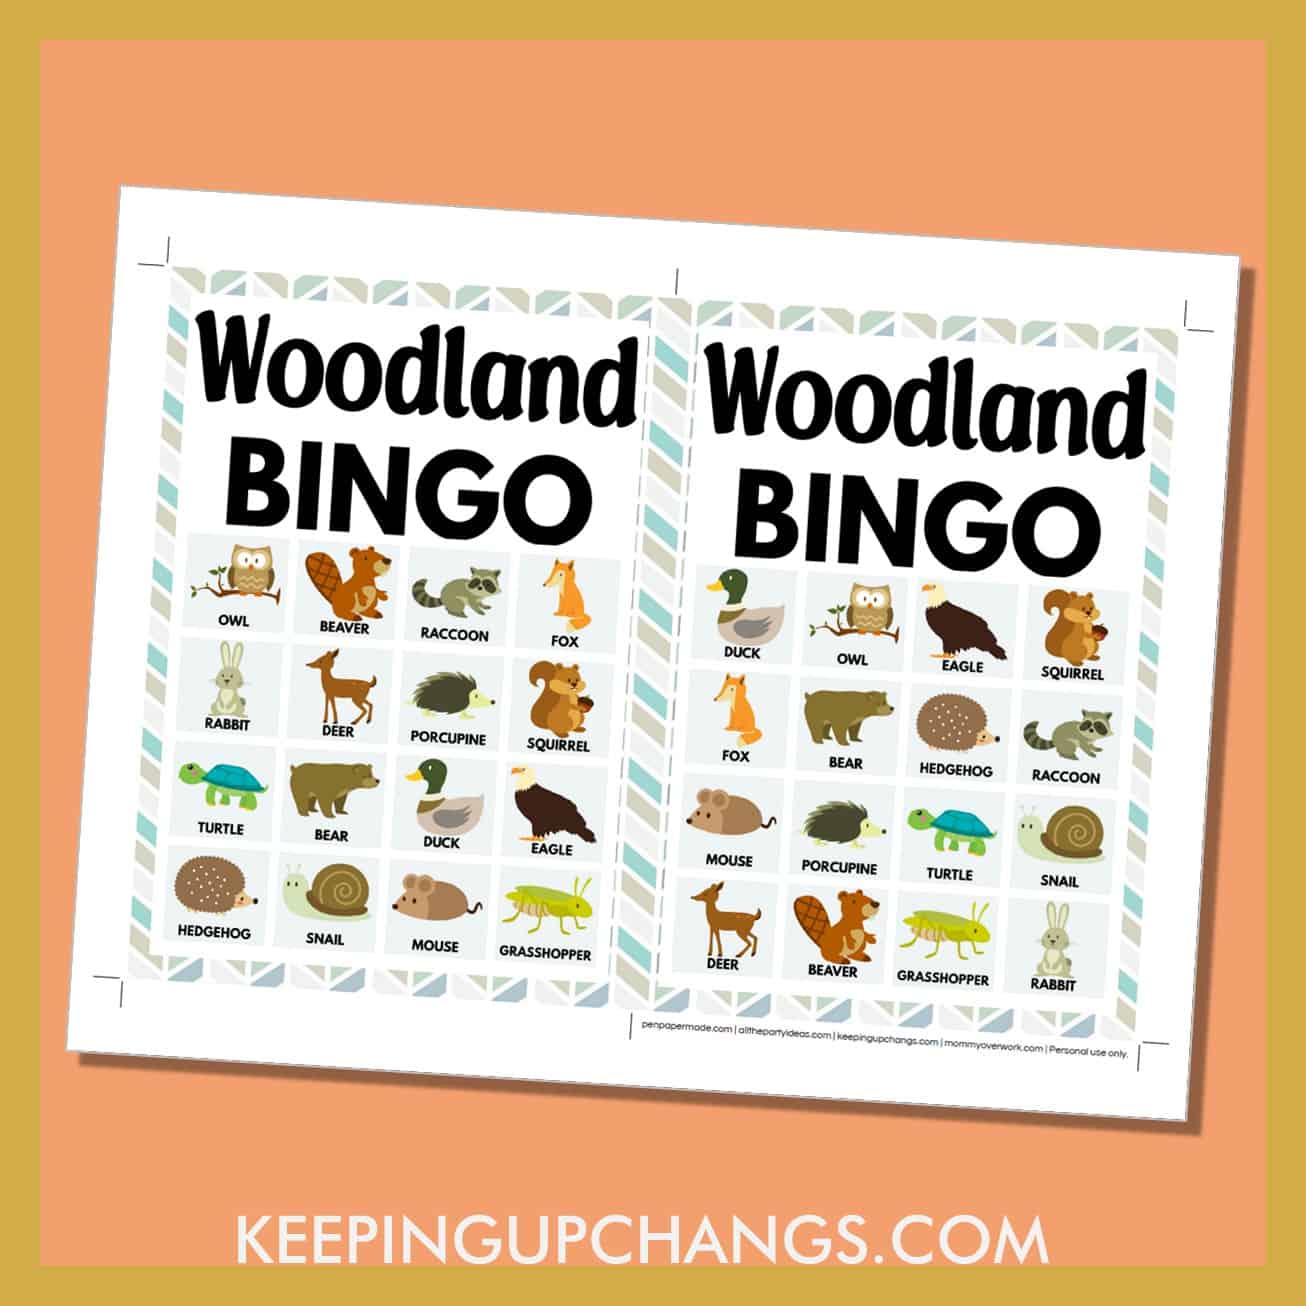 free woodland bingo card 4x4 5x7 game boards with images and text words.